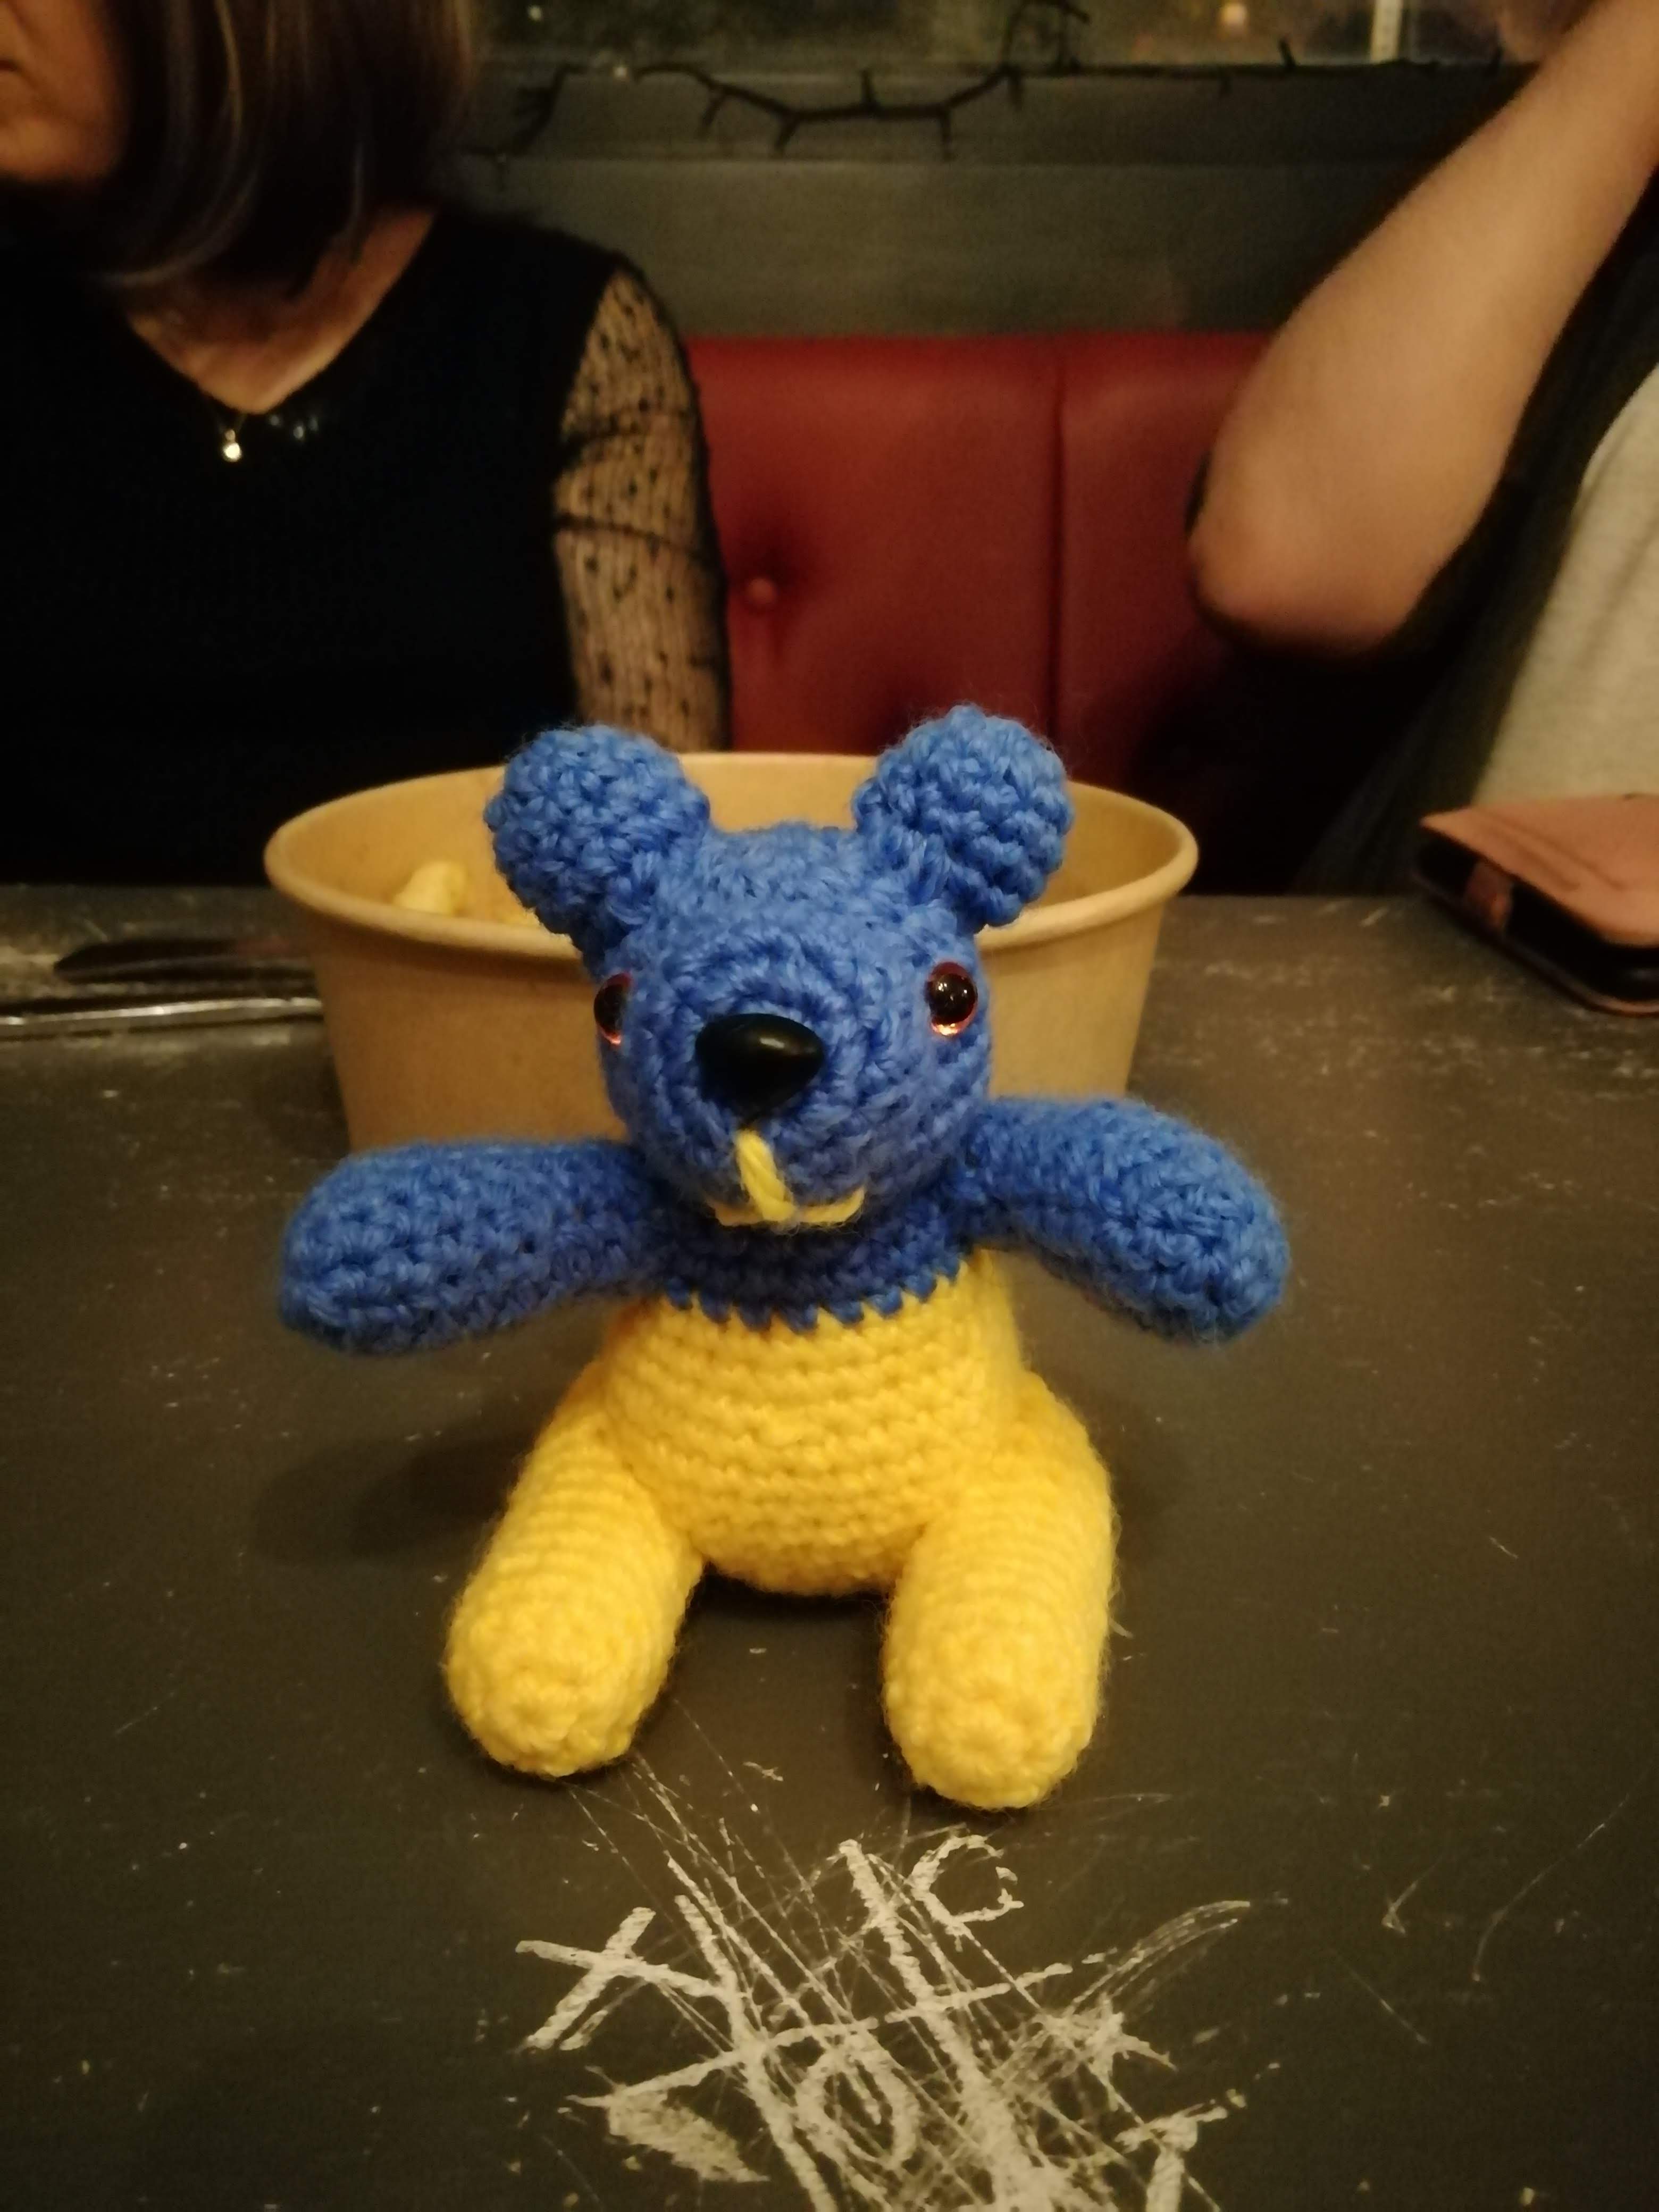 Blue and yellow panda on a table with chip basket